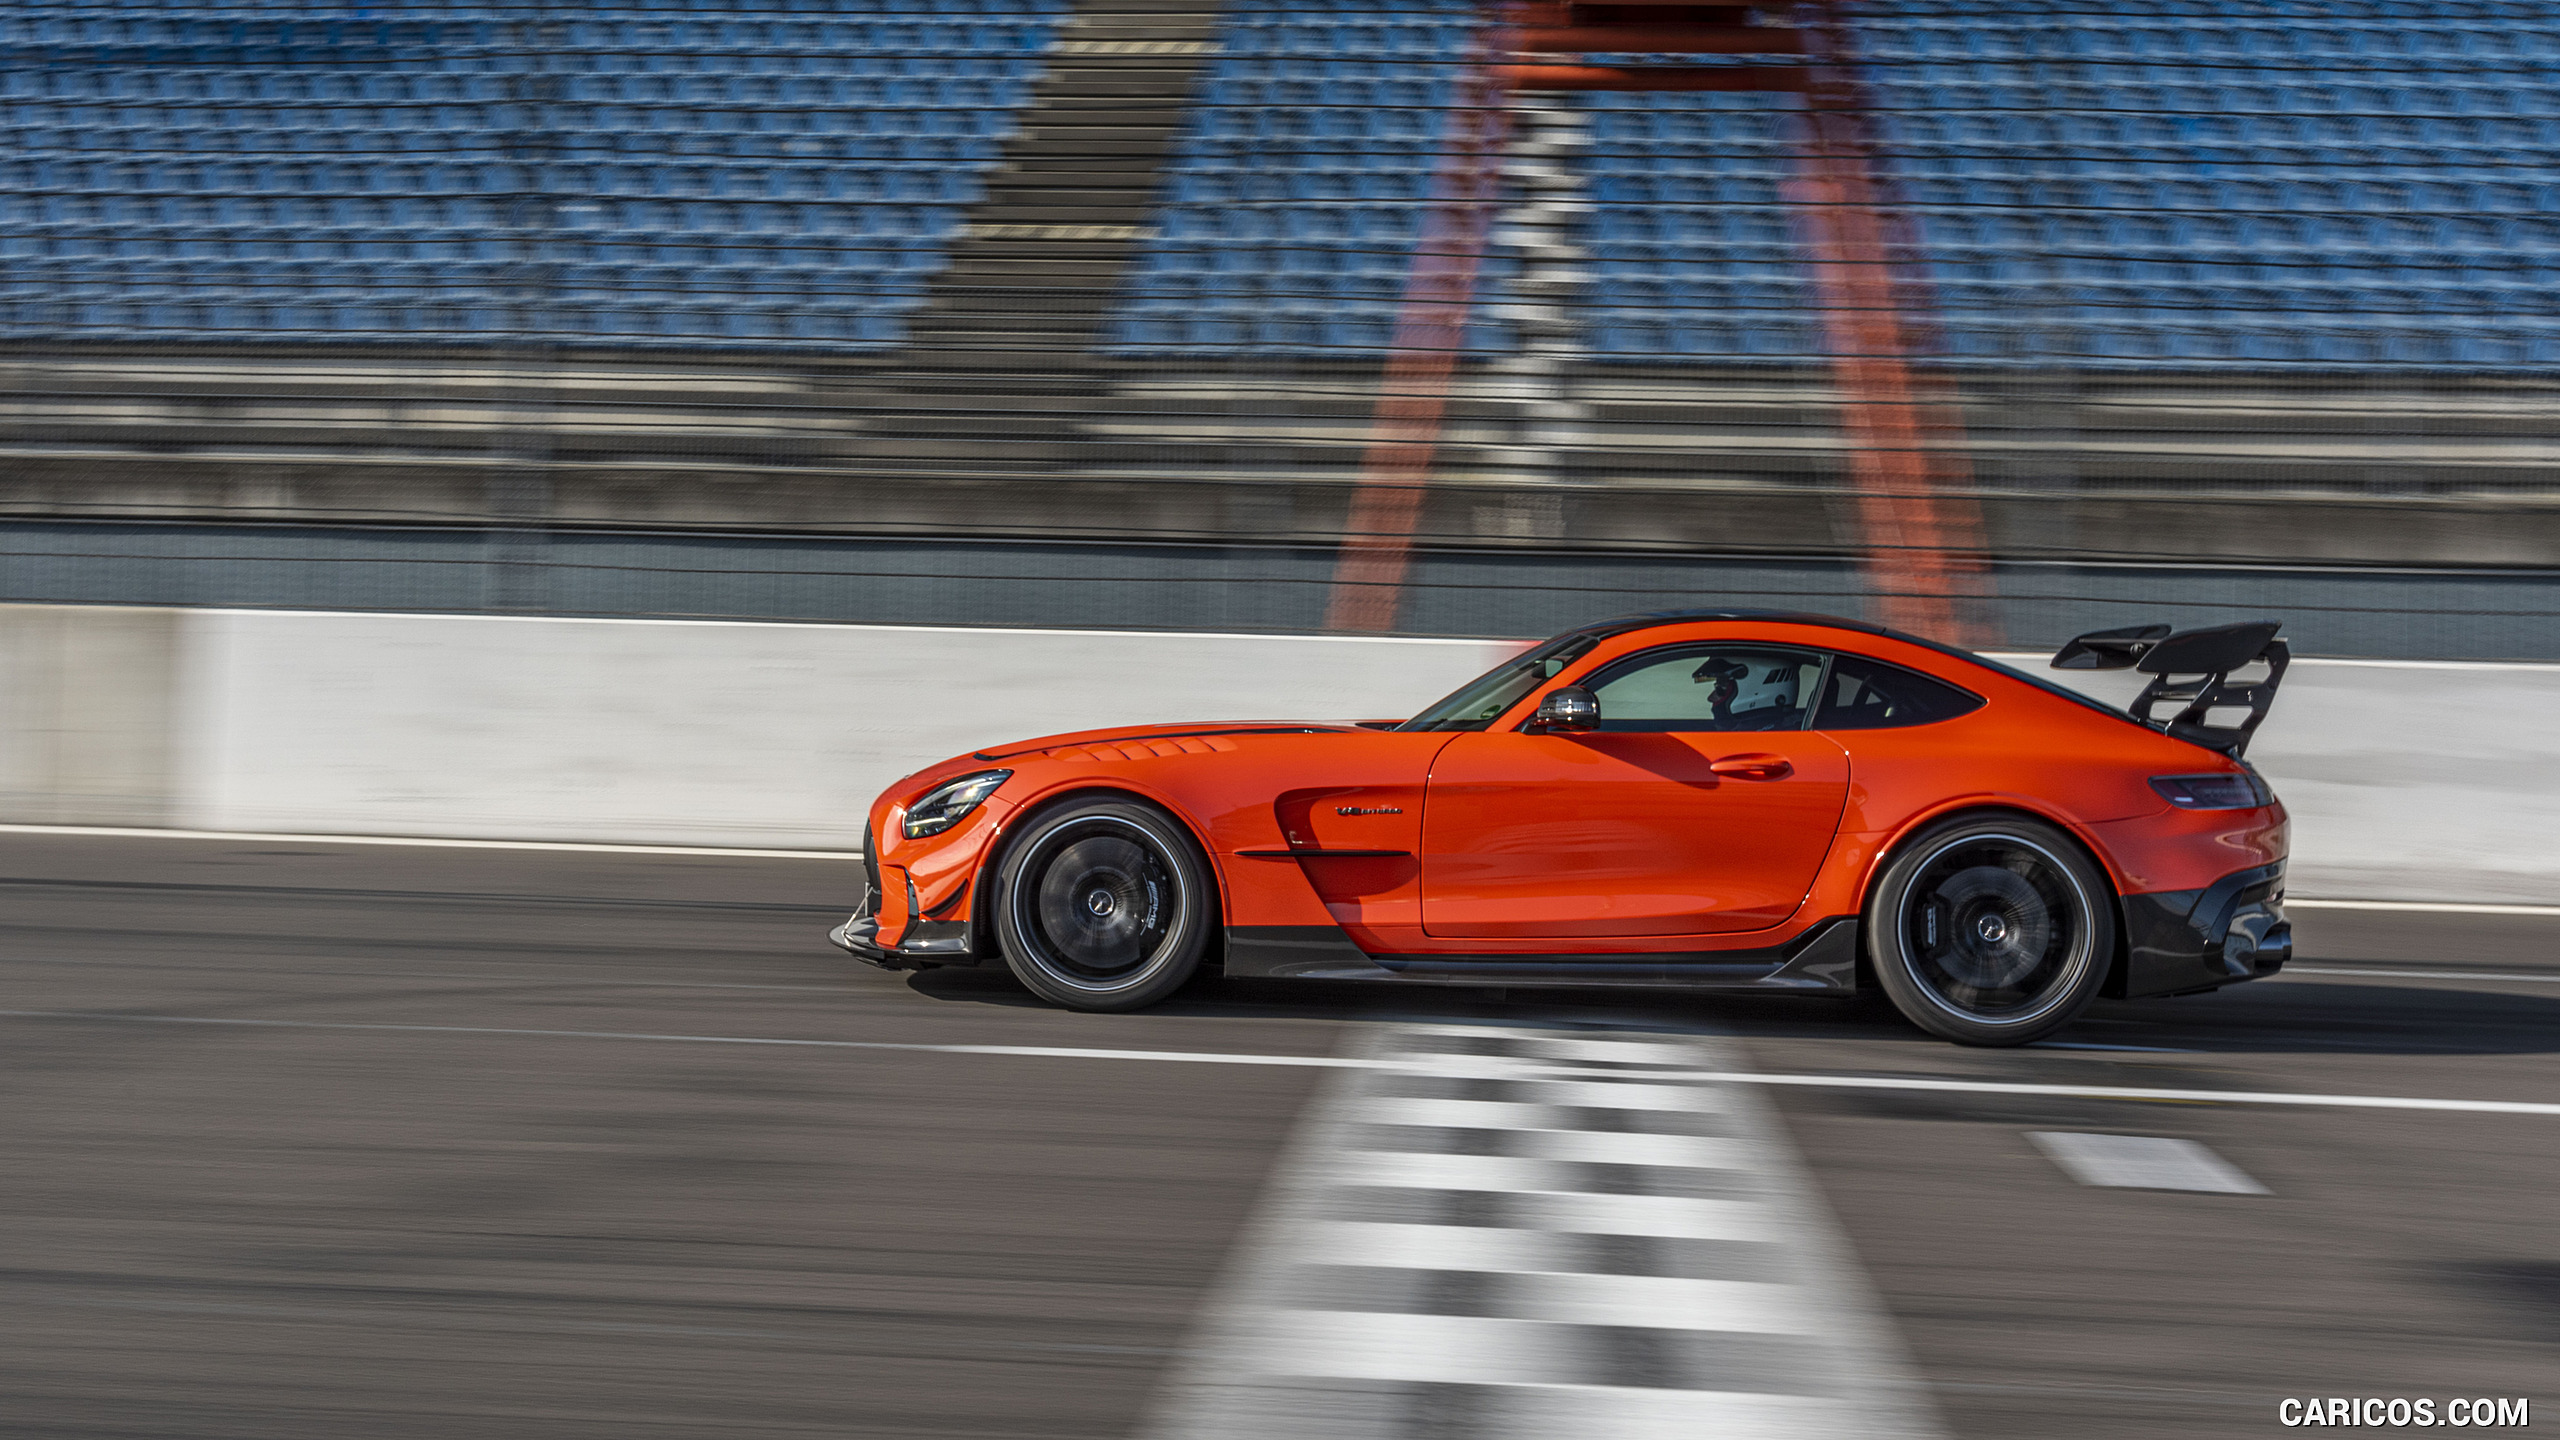 2021 Mercedes-AMG GT Black Series (Color: Magma Beam) - Side, #122 of 215